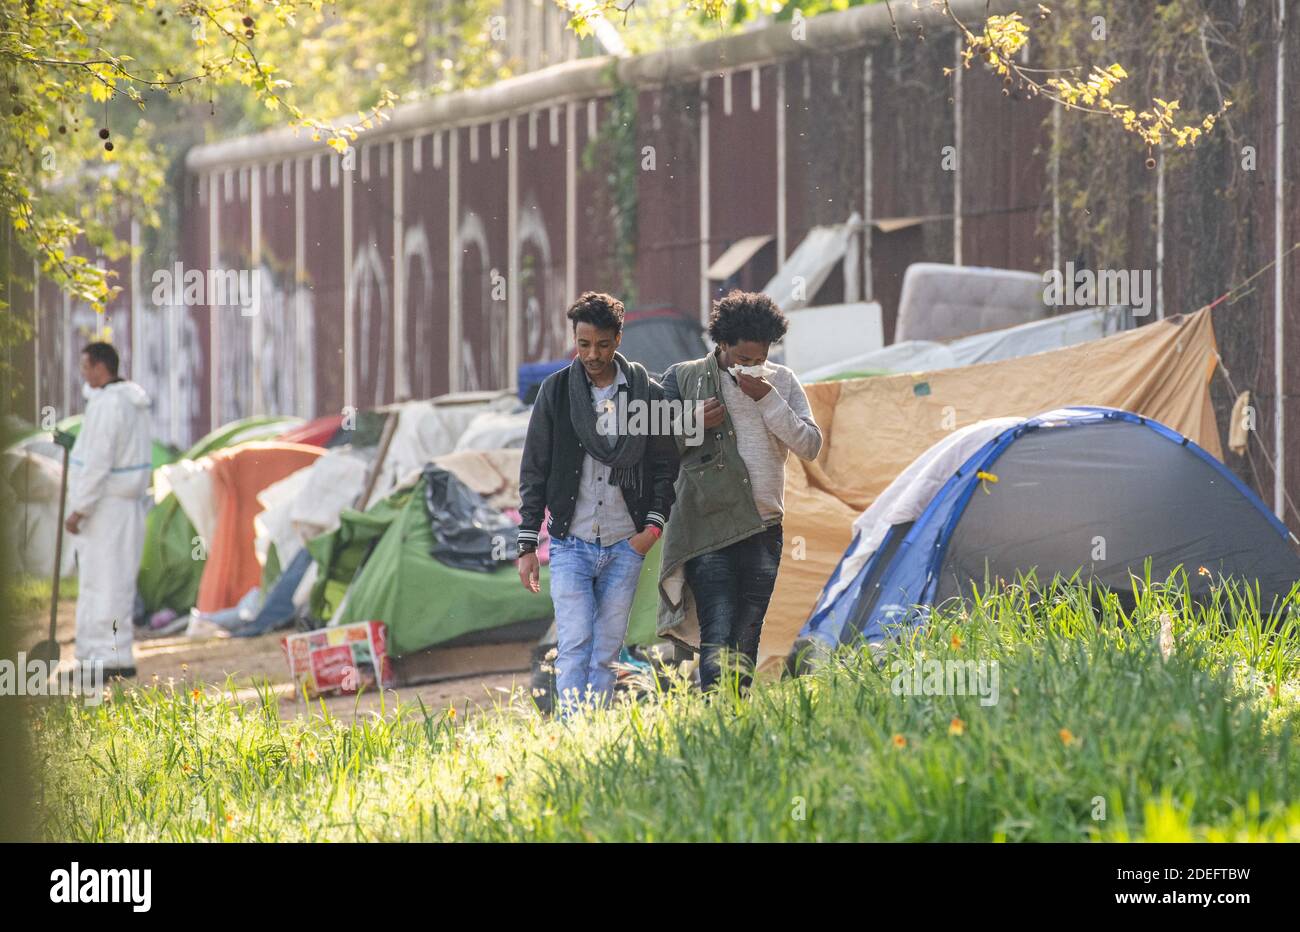 A camp of migrants located Porte d'Aubervilliers in Paris, France along the  Boulevard Périphérique was evacuated on April 18, 2019. Photo by Christophe  Geyres/ABACAPRESS.COM Stock Photo - Alamy